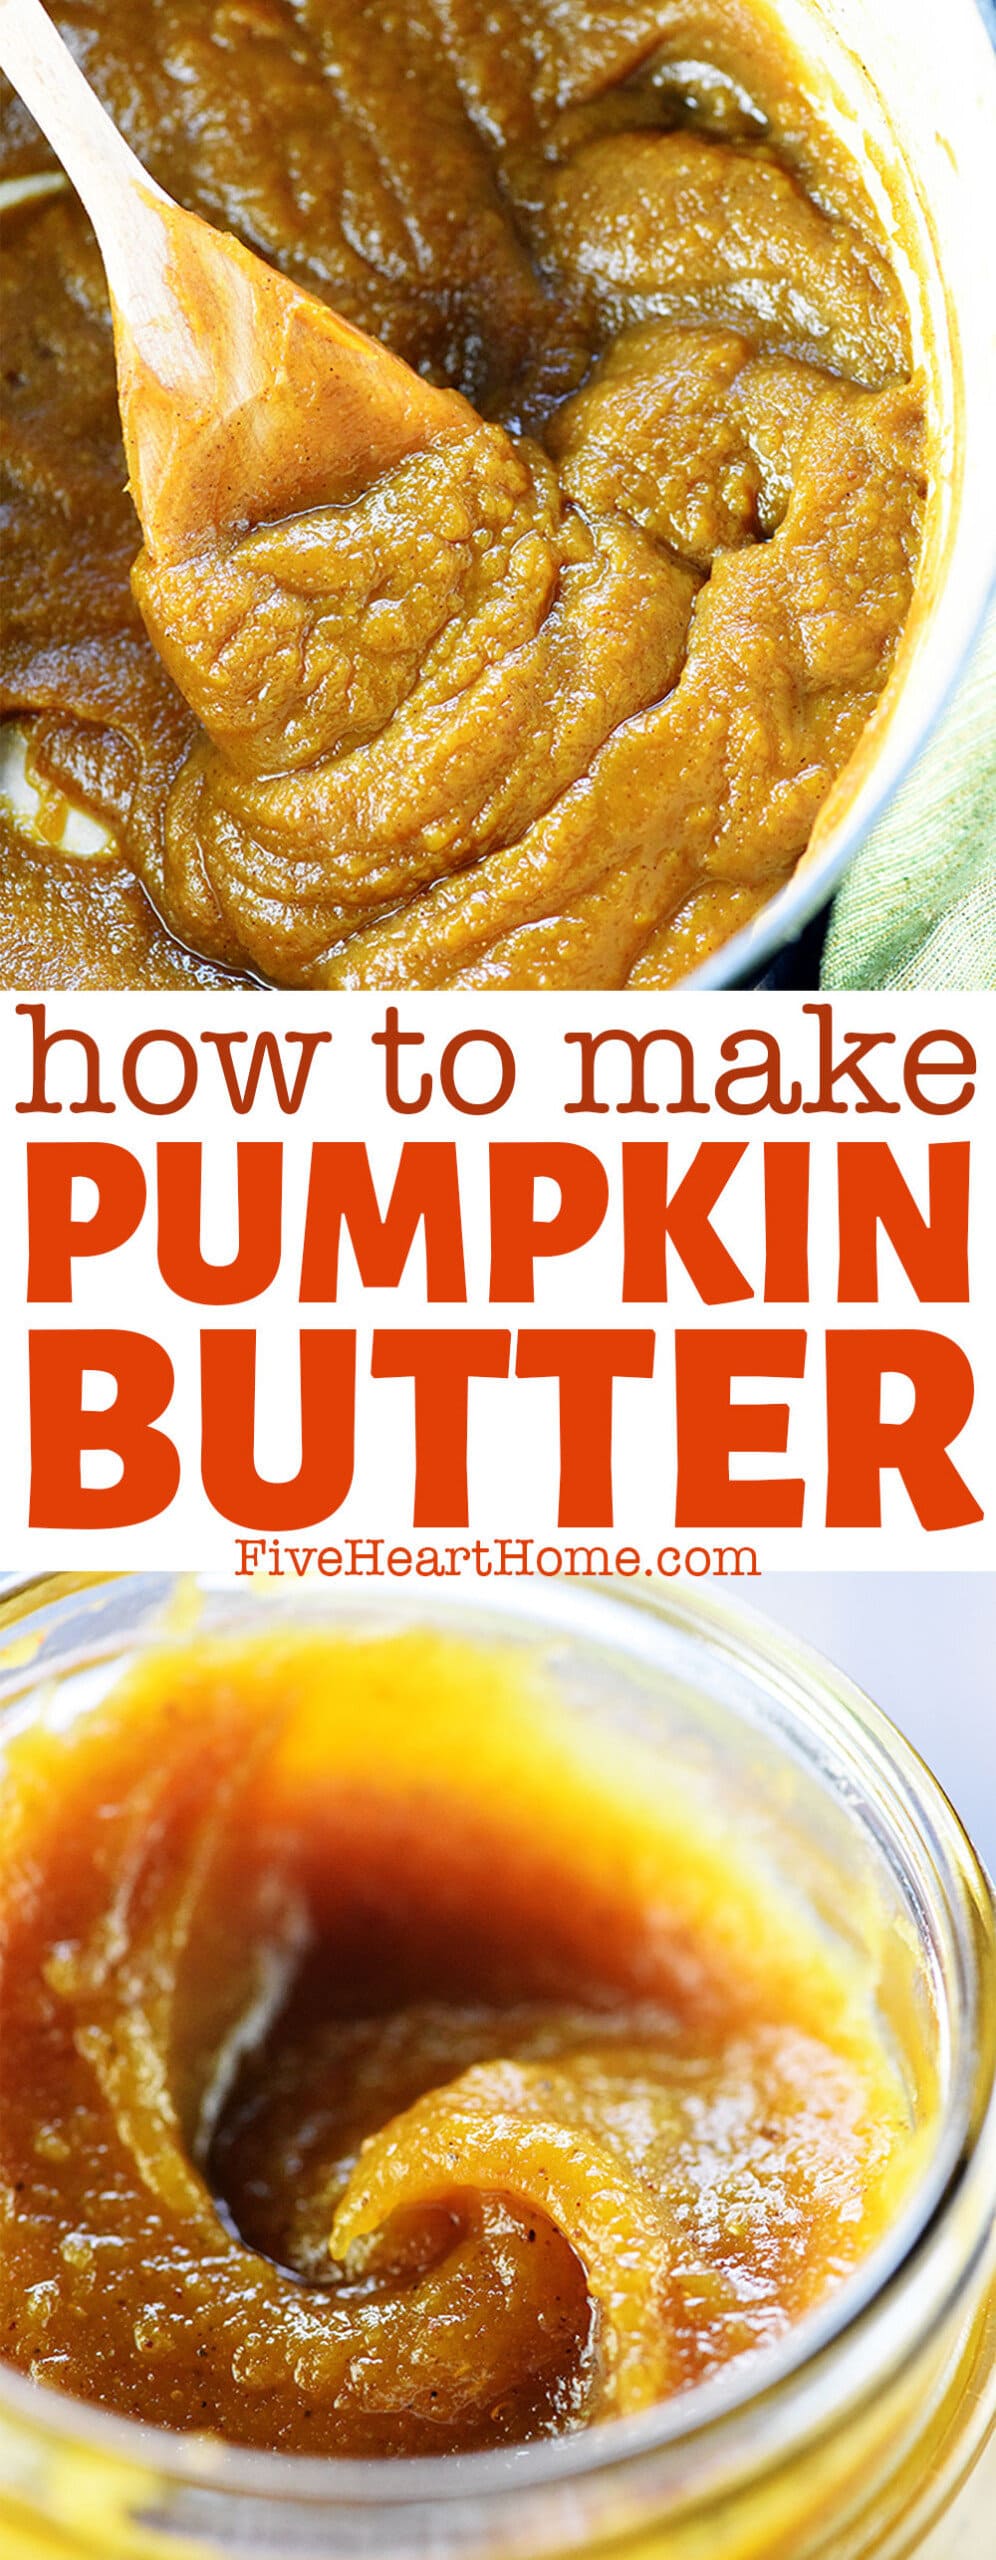 Pumpkin Butter ~ a healthy, creamy, homemade recipe that's easy to make and delicious slathered on toast and waffles or stirred into oatmeal and smoothies! | FiveHeartHome.com via @fivehearthome